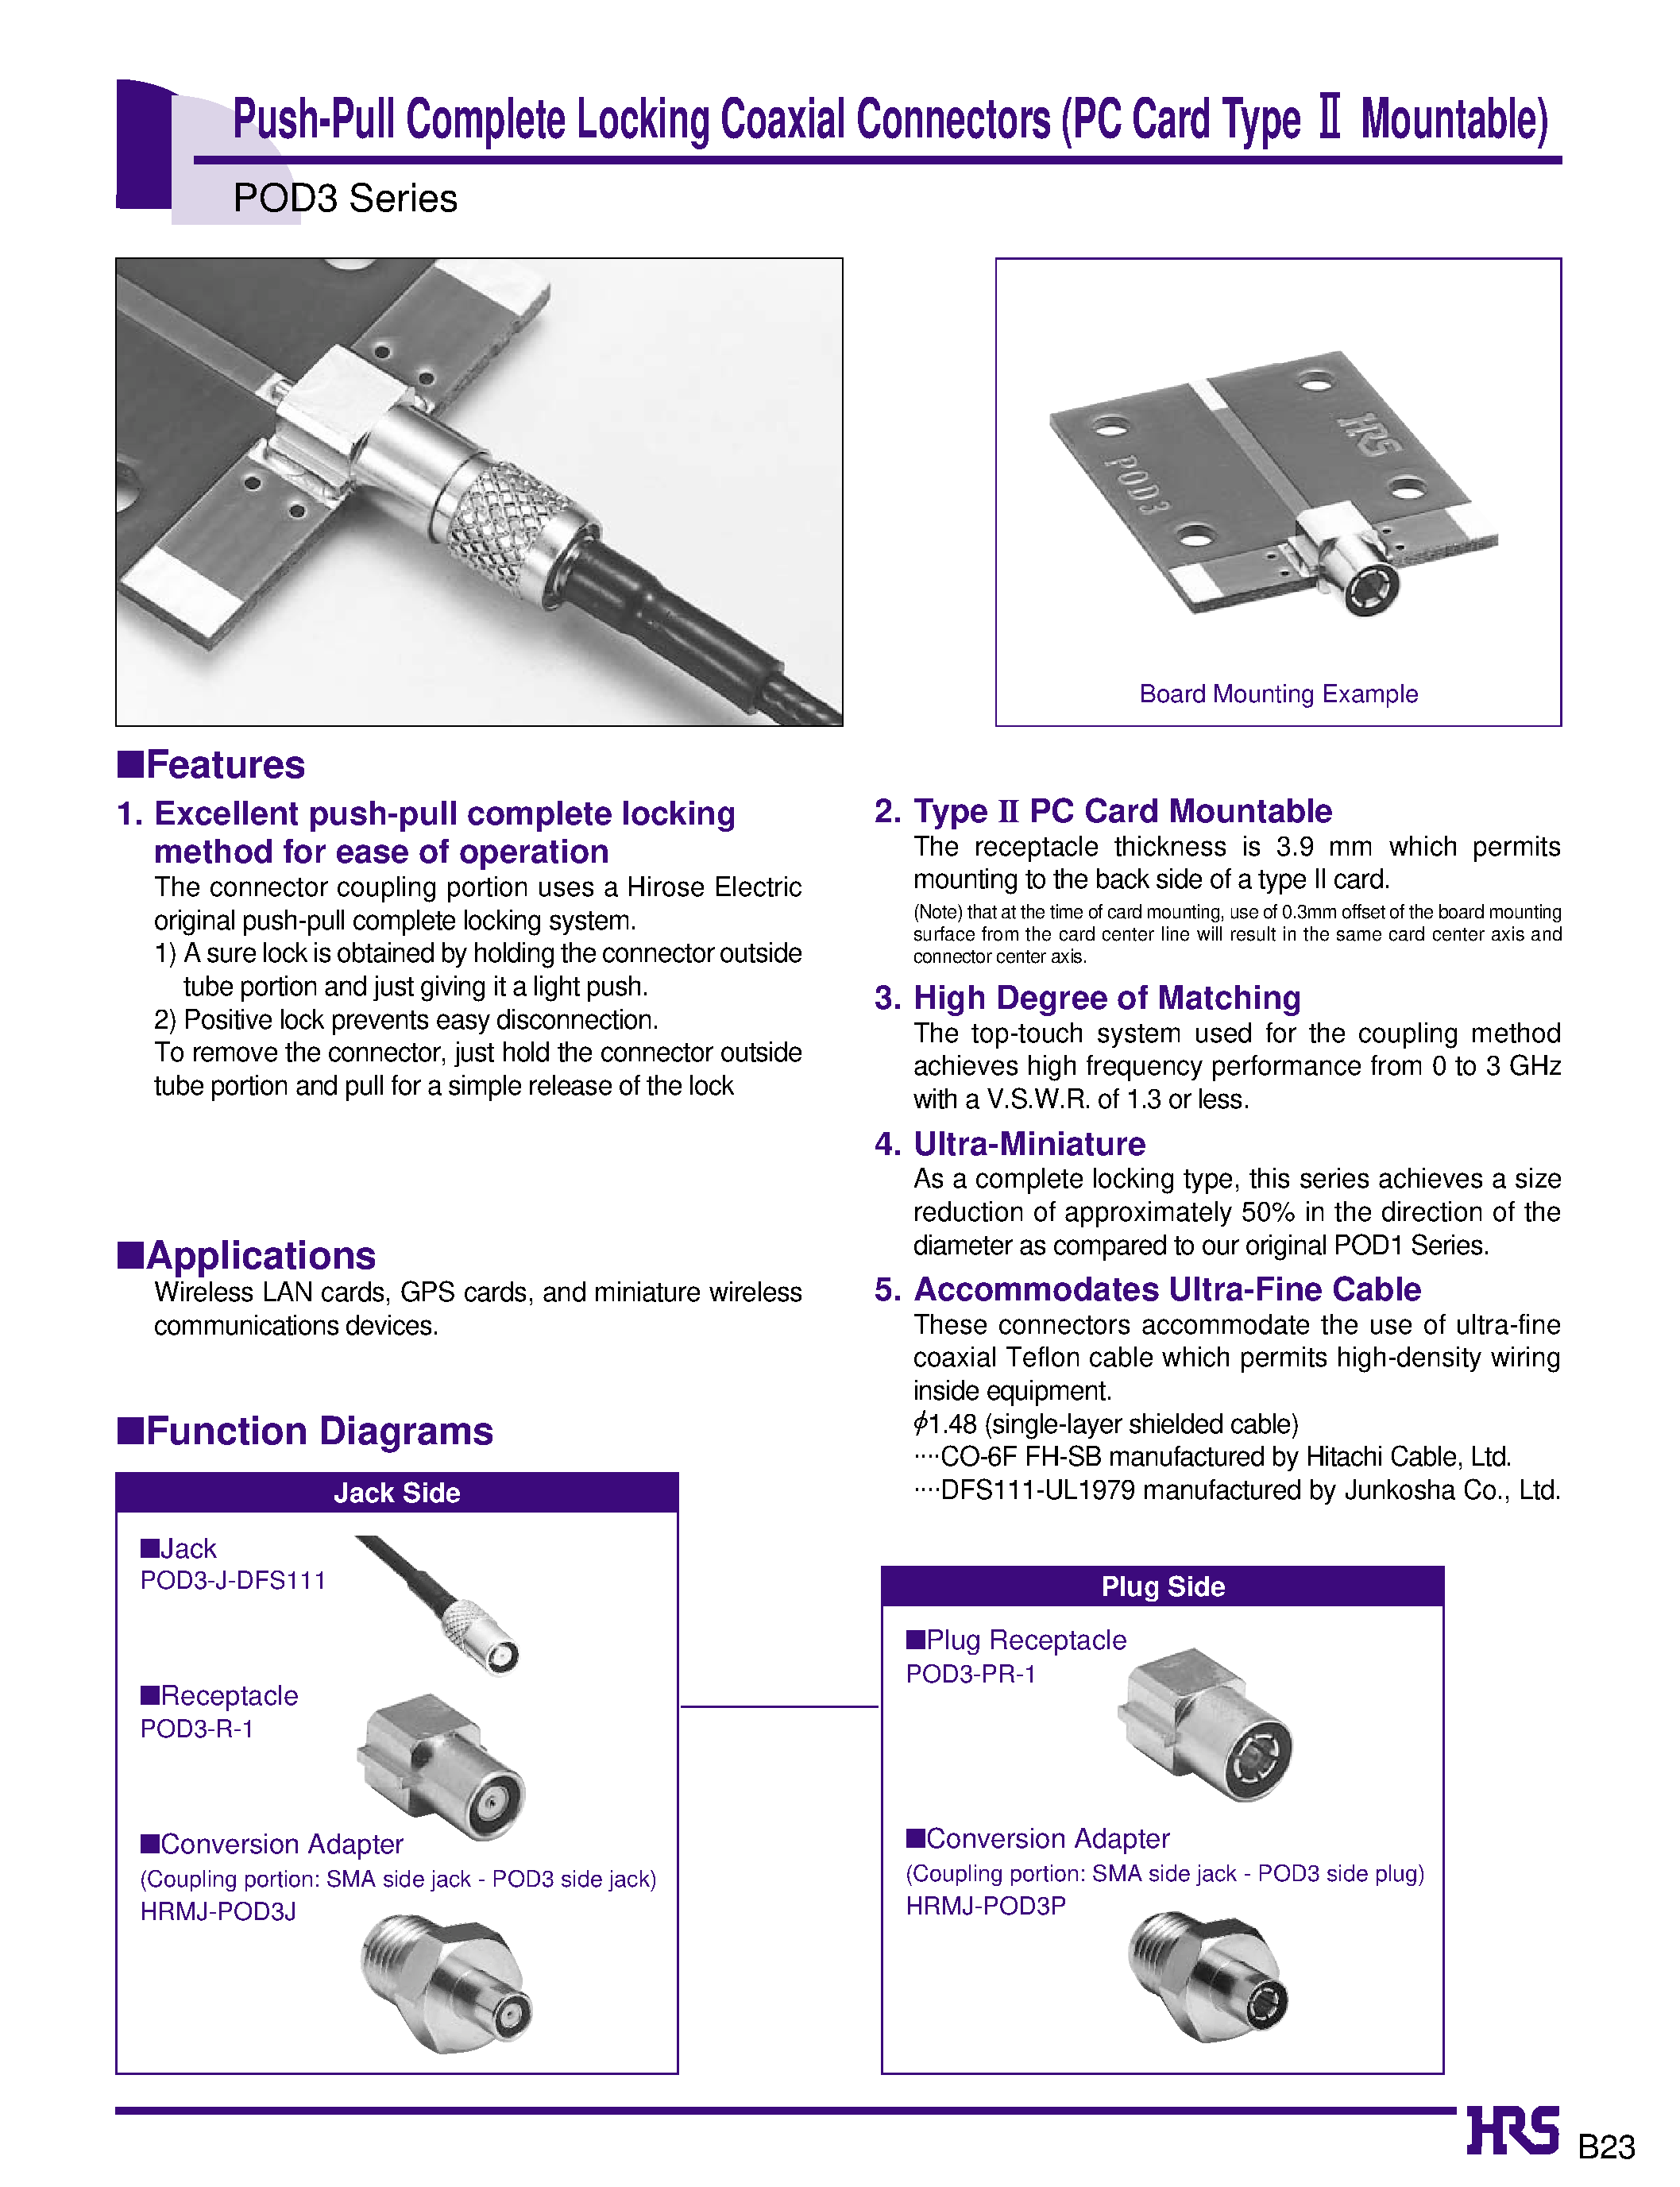 Datasheet POD3-J-DFS111 - Push-Pull Complete Locking Coaxial Connectors (PC Card Type 2 Mountable) page 1